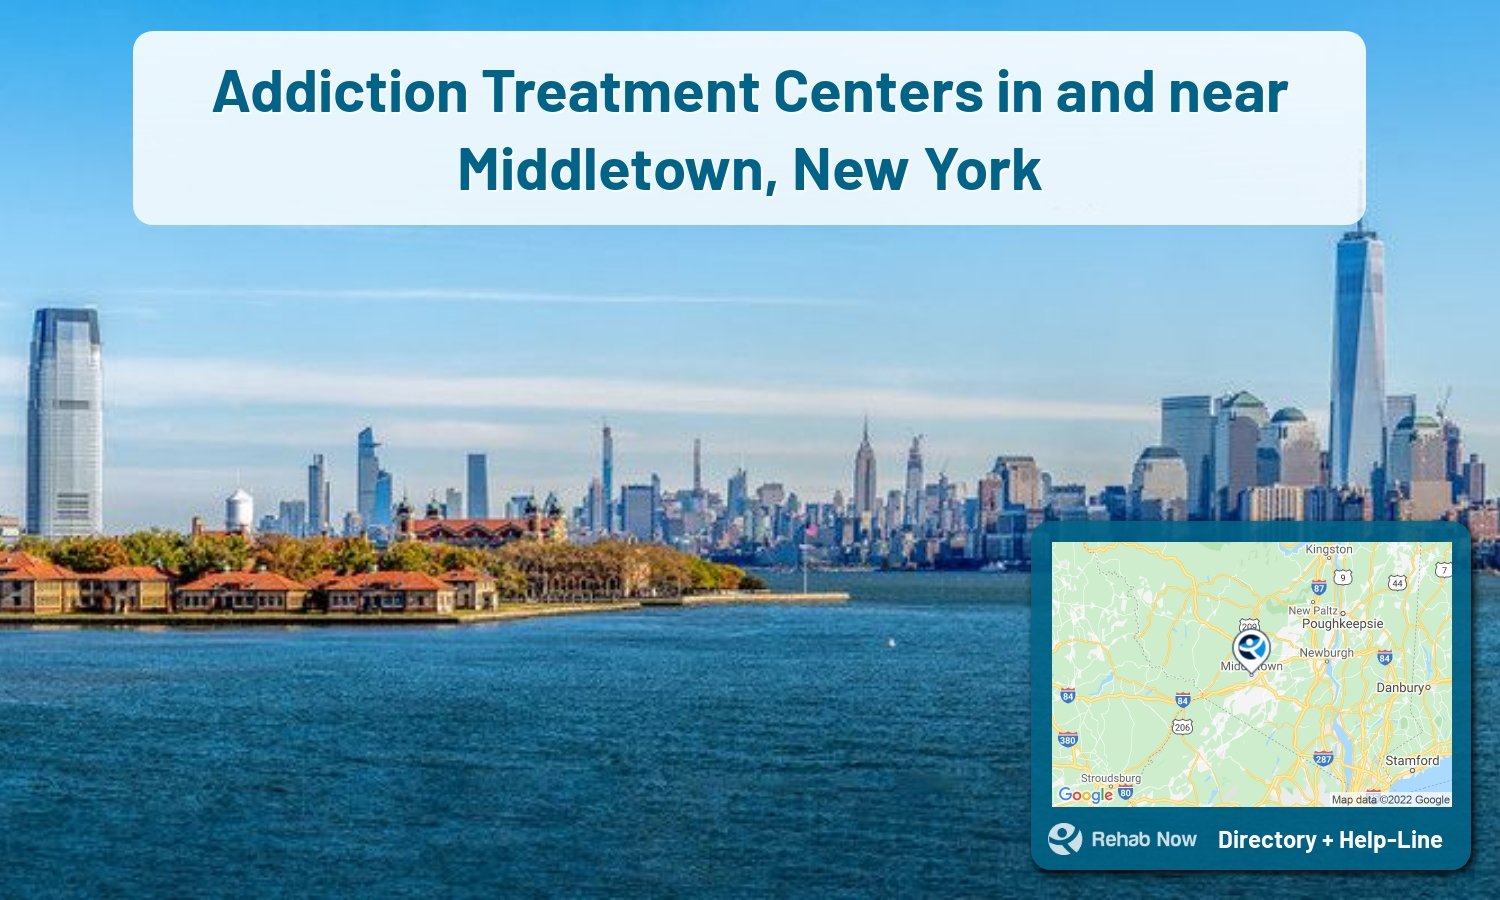 Middletown, NY Treatment Centers. Find drug rehab in Middletown, New York, or detox and treatment programs. Get the right help now!